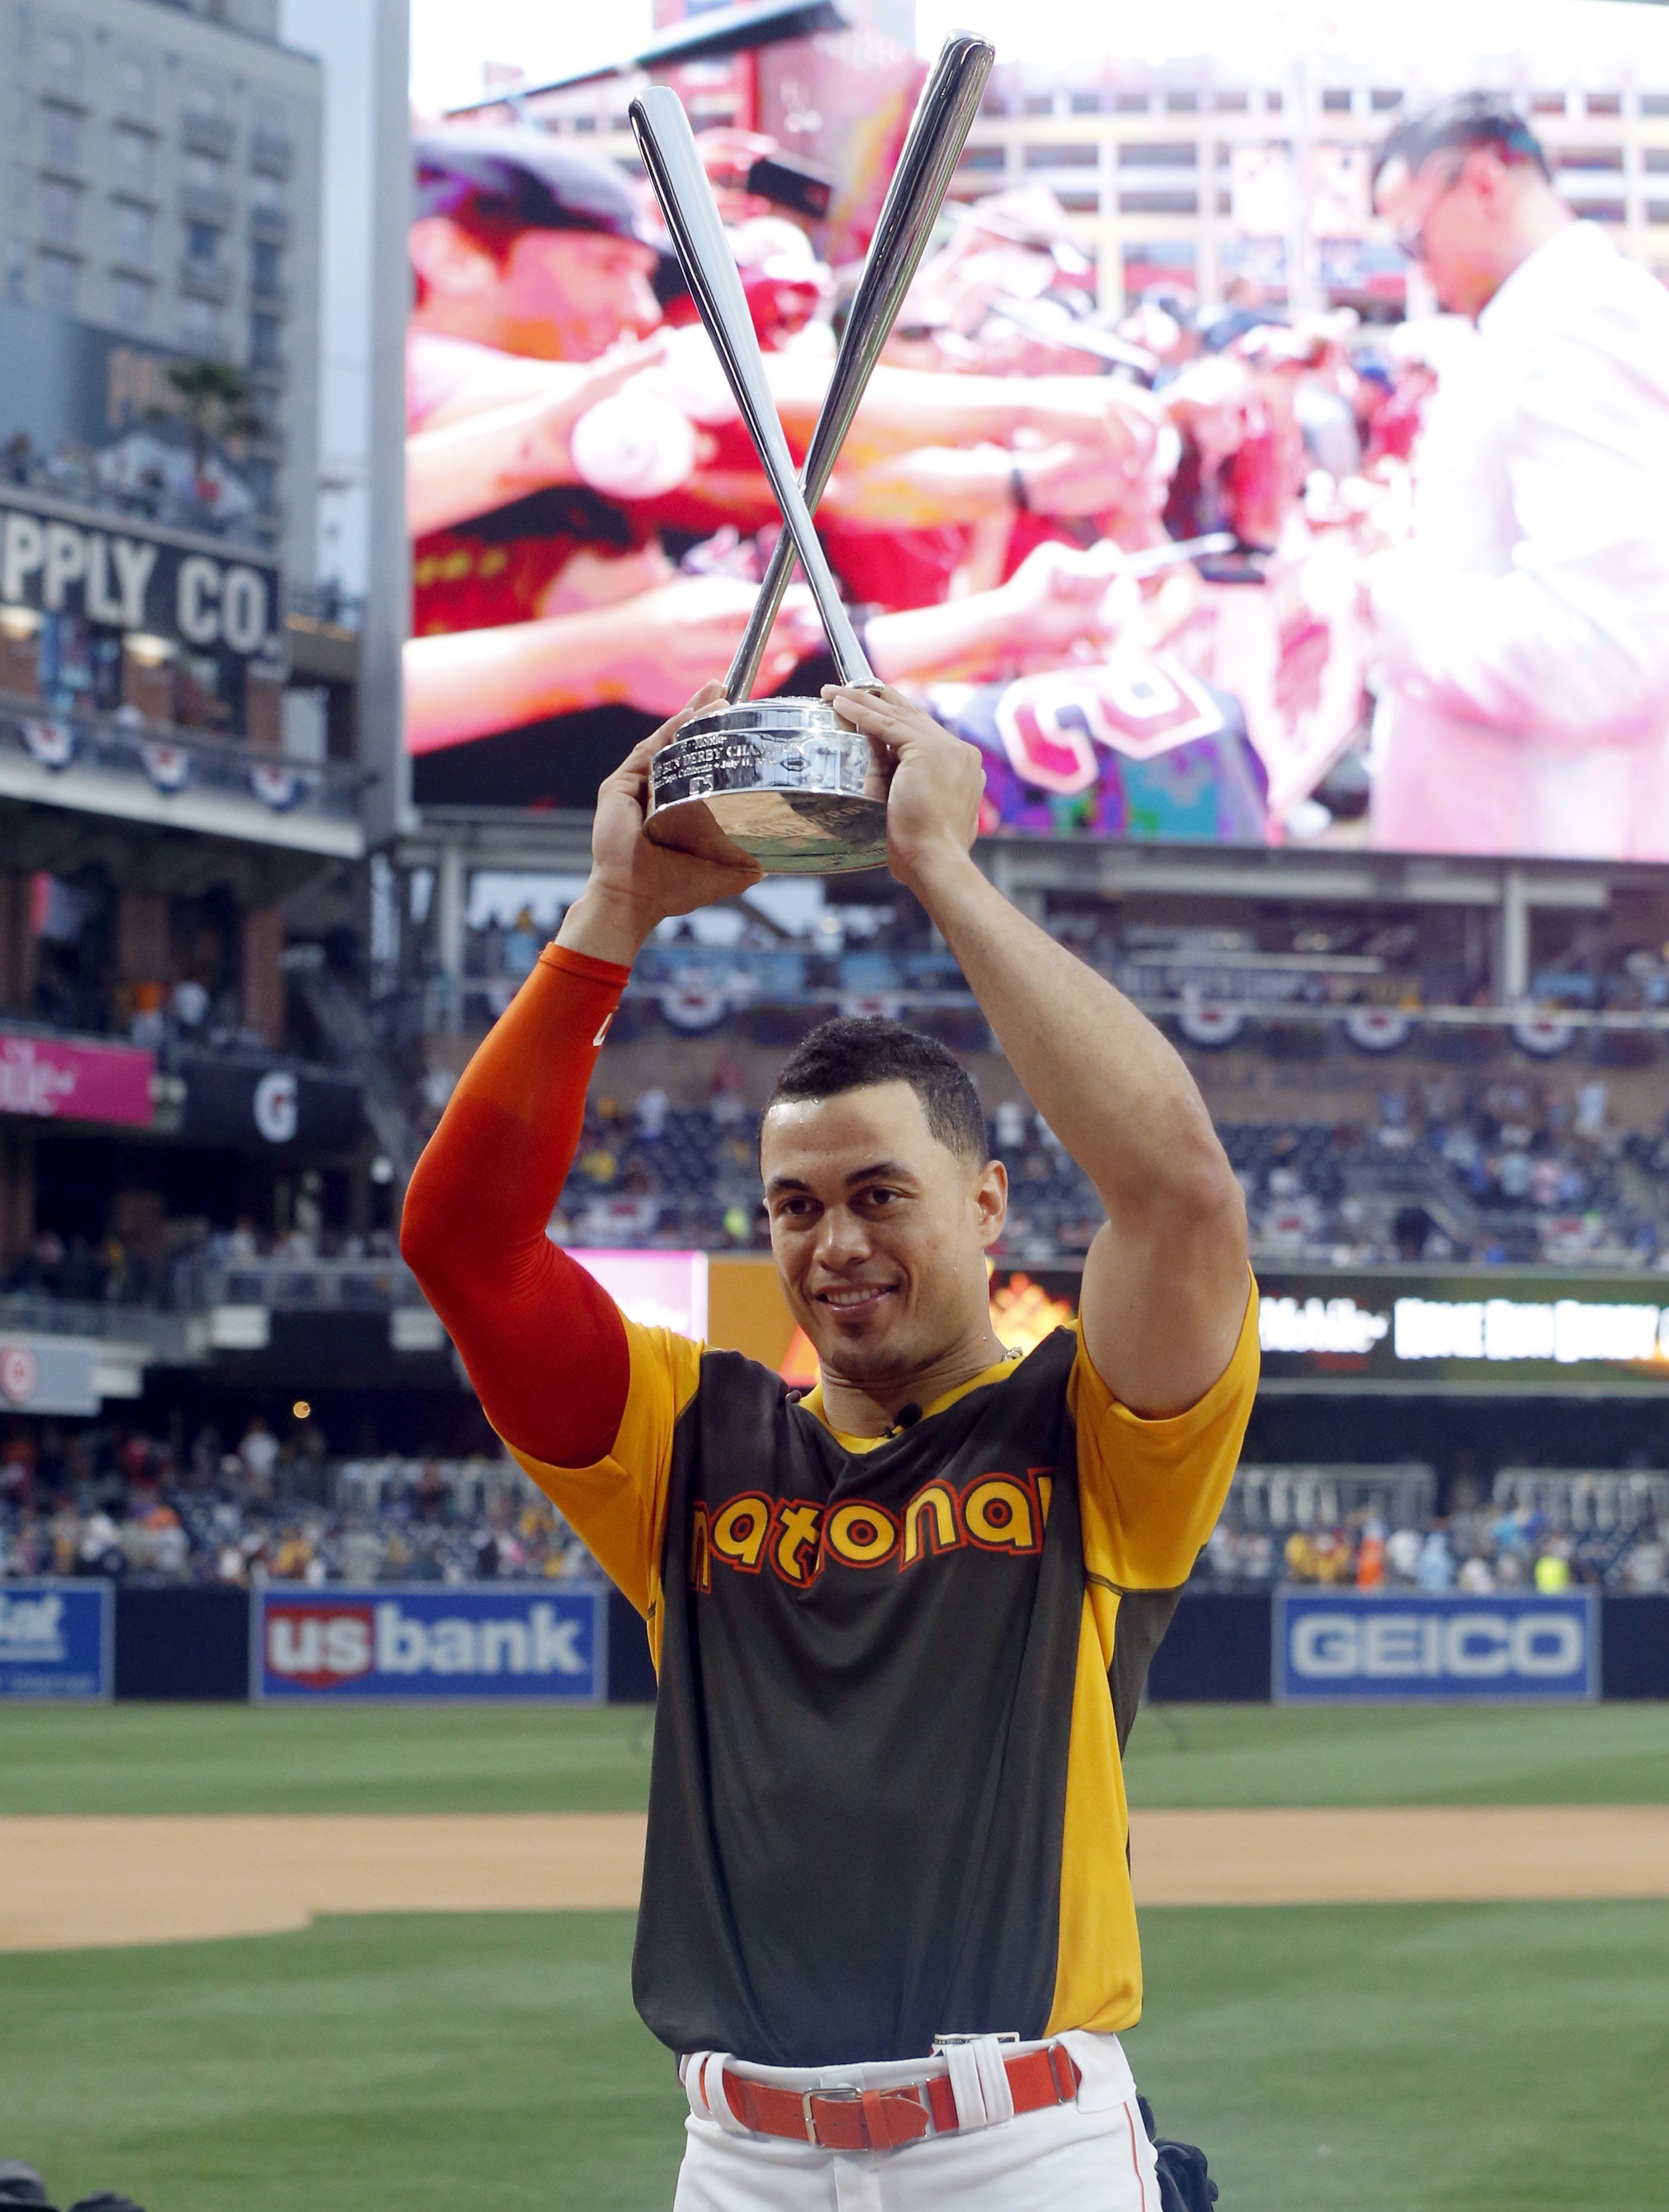 Giancarlo Stanton hits record 61 home runs, defeats defending derby champ  Frazier, The Daily Courier